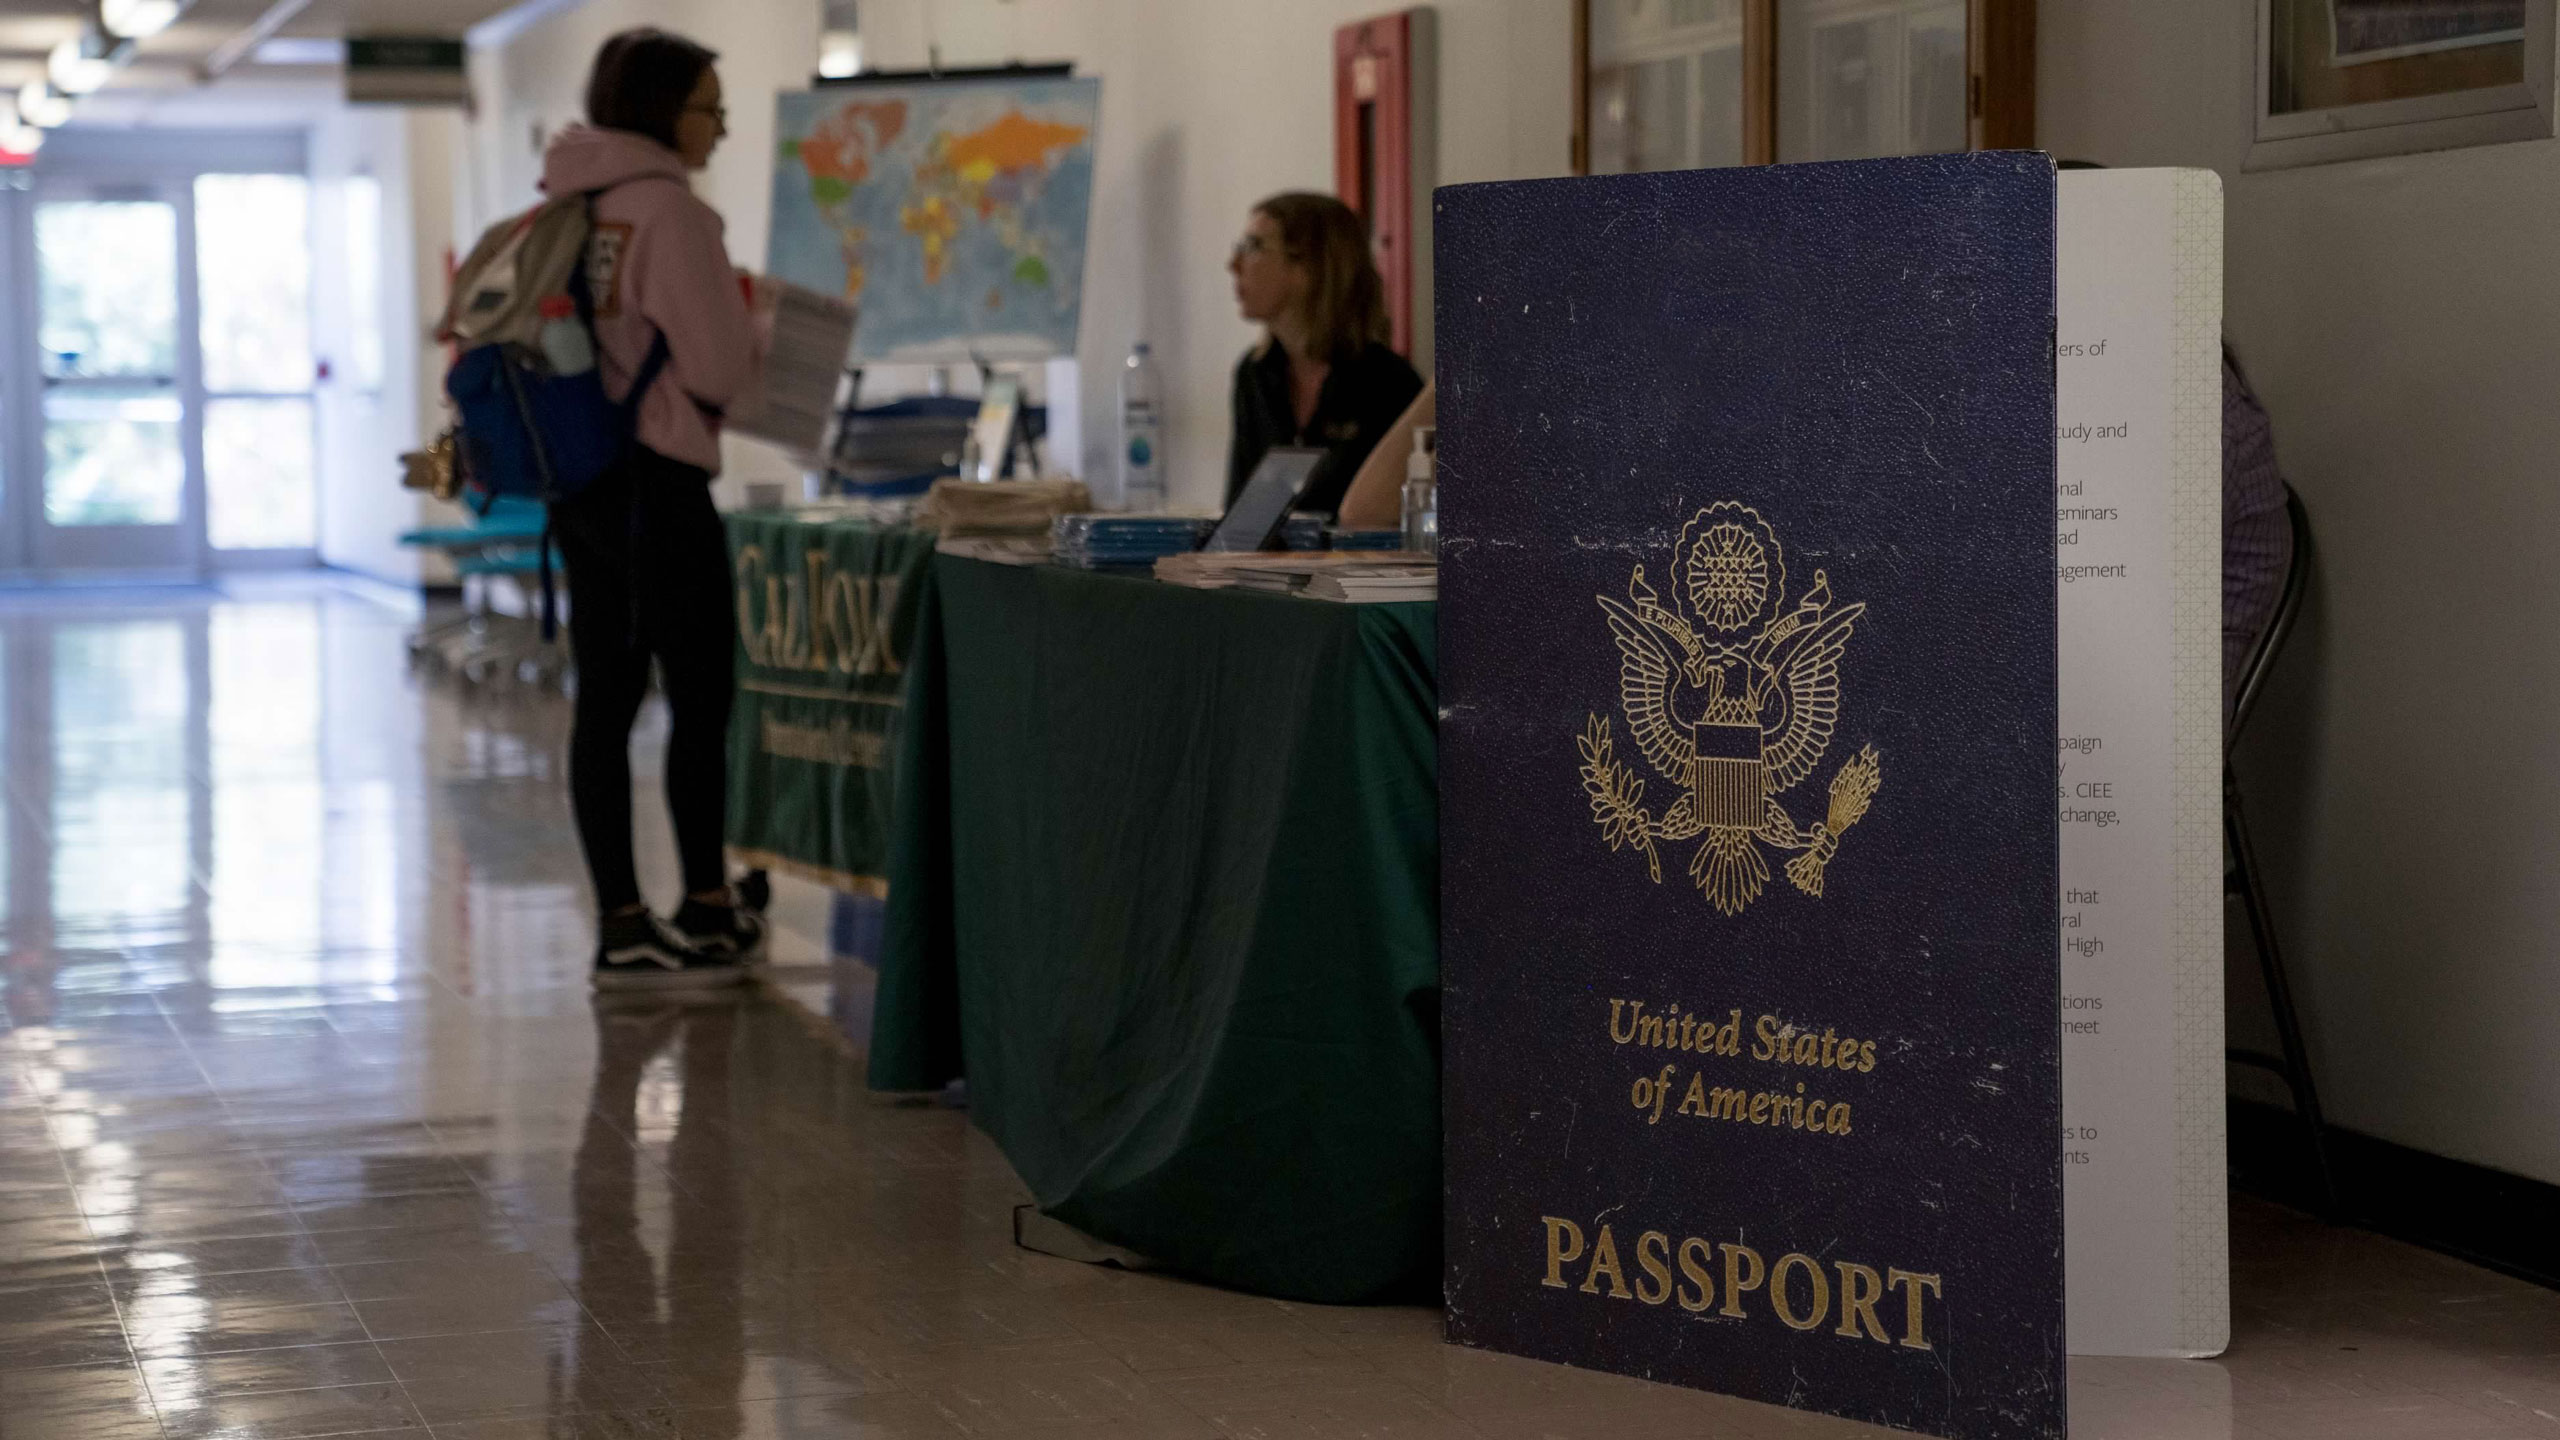 A staff member greets a student outside the passport event in building 52